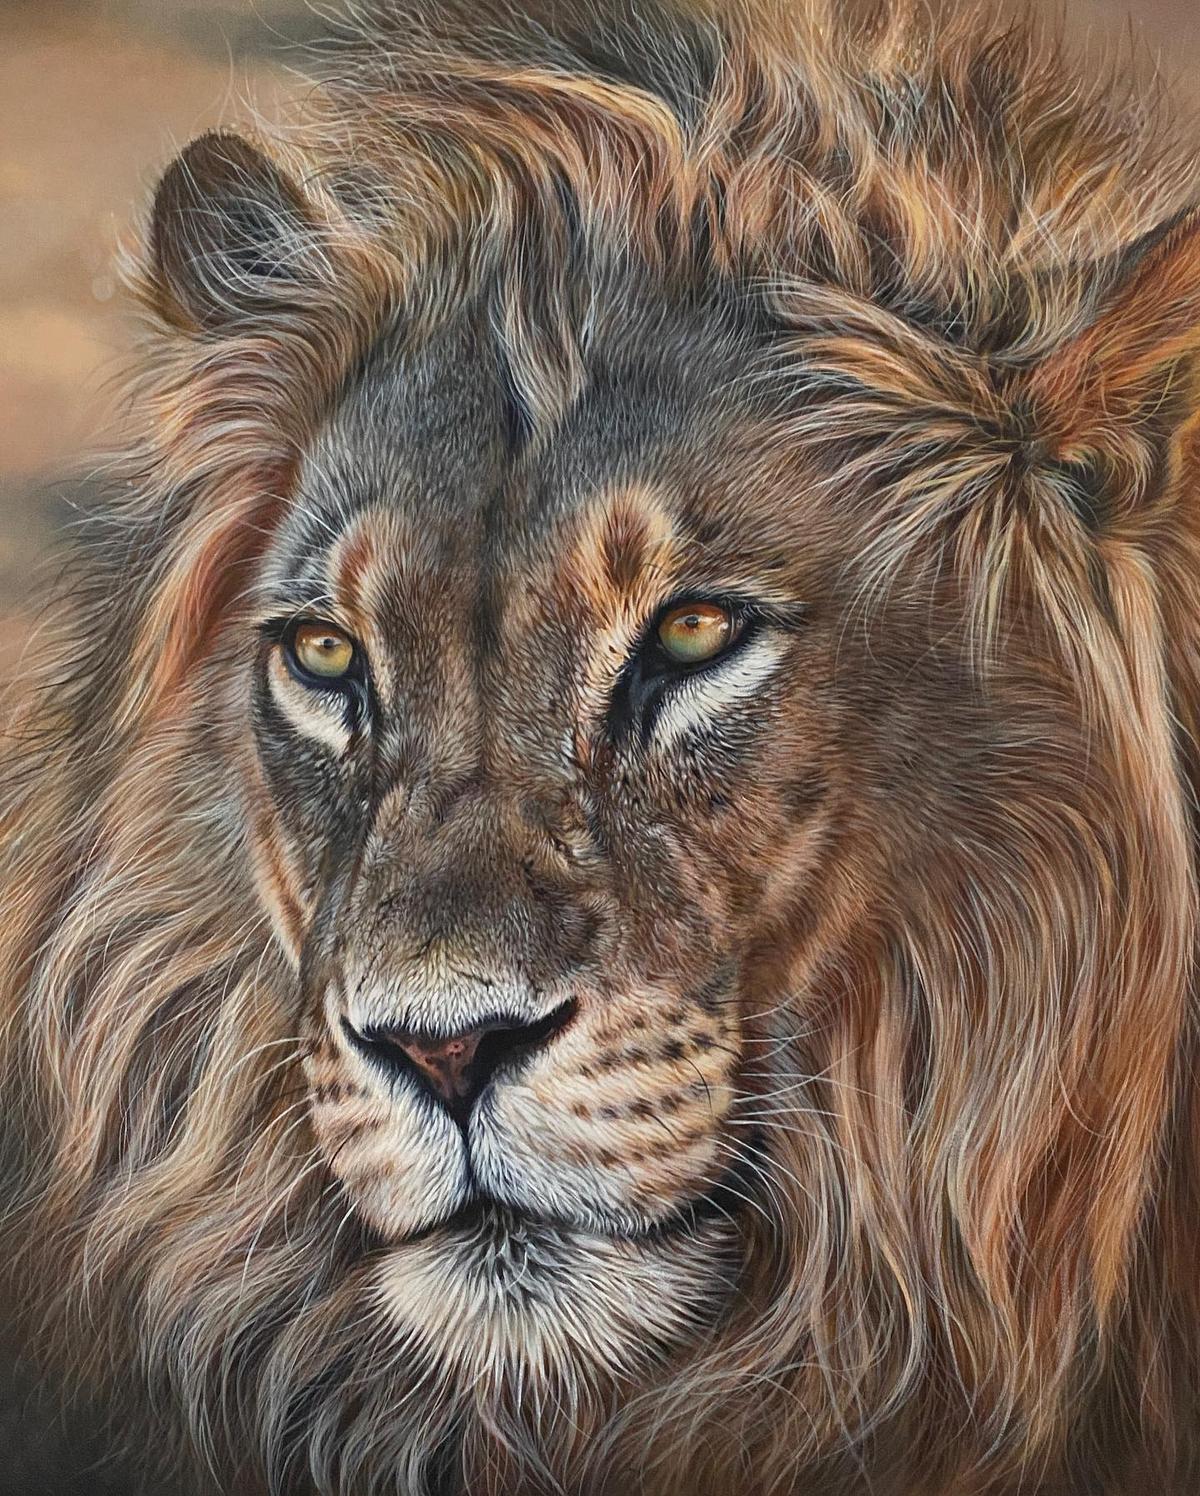 Commission acrylic painting of a male lion by Julie Rhodes. (Courtesy of <a href="https://www.julierhodes.com/">Julie Rhodes</a>)